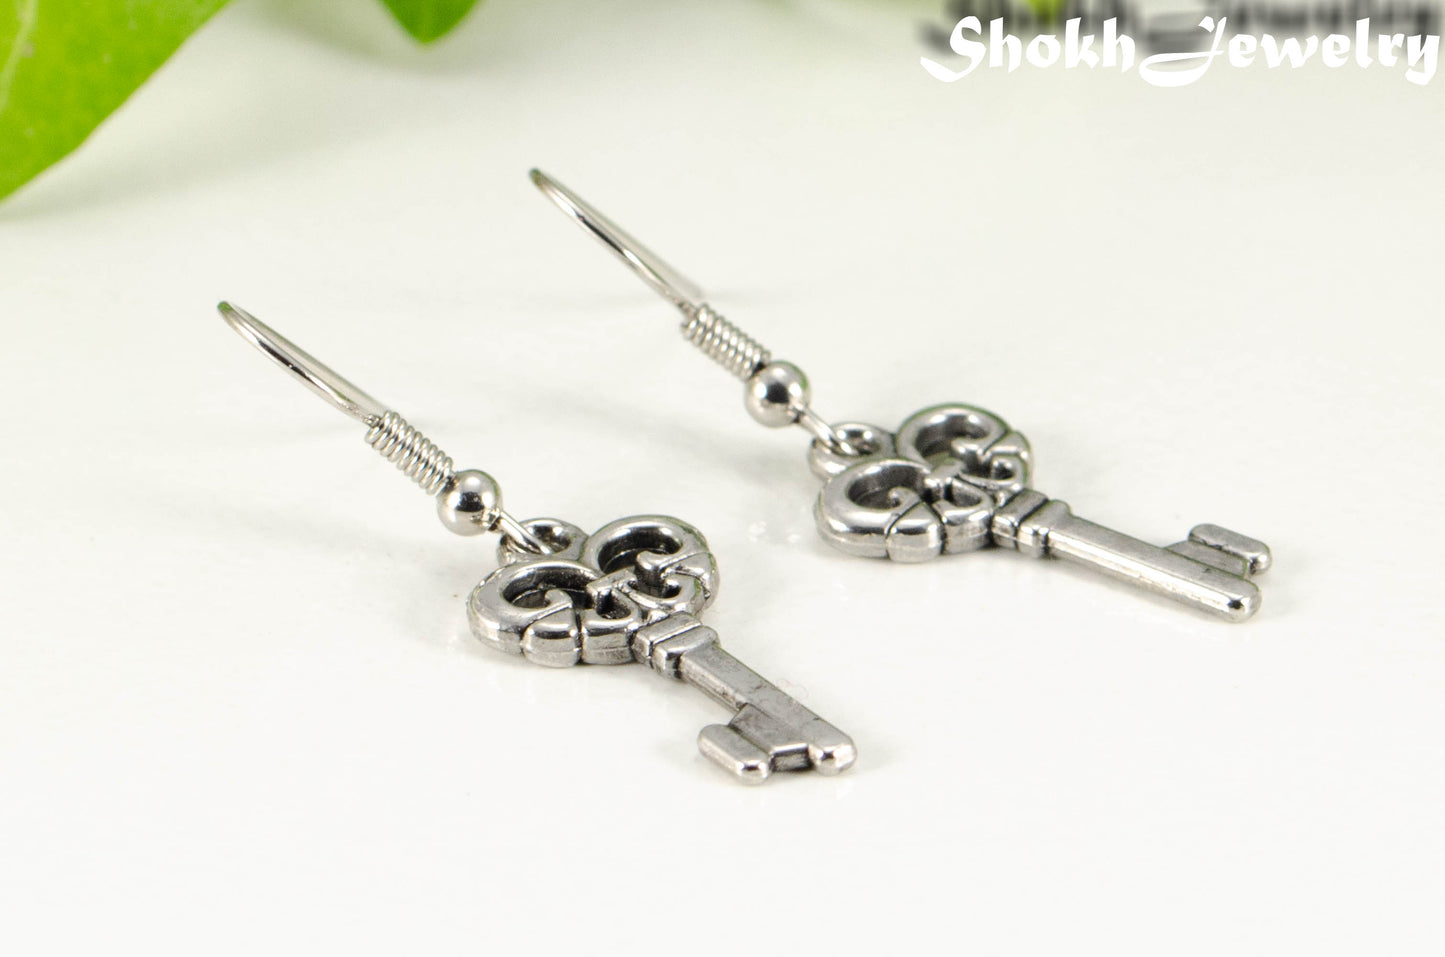 Close up of Small Skeleton Key Charm Earrings.